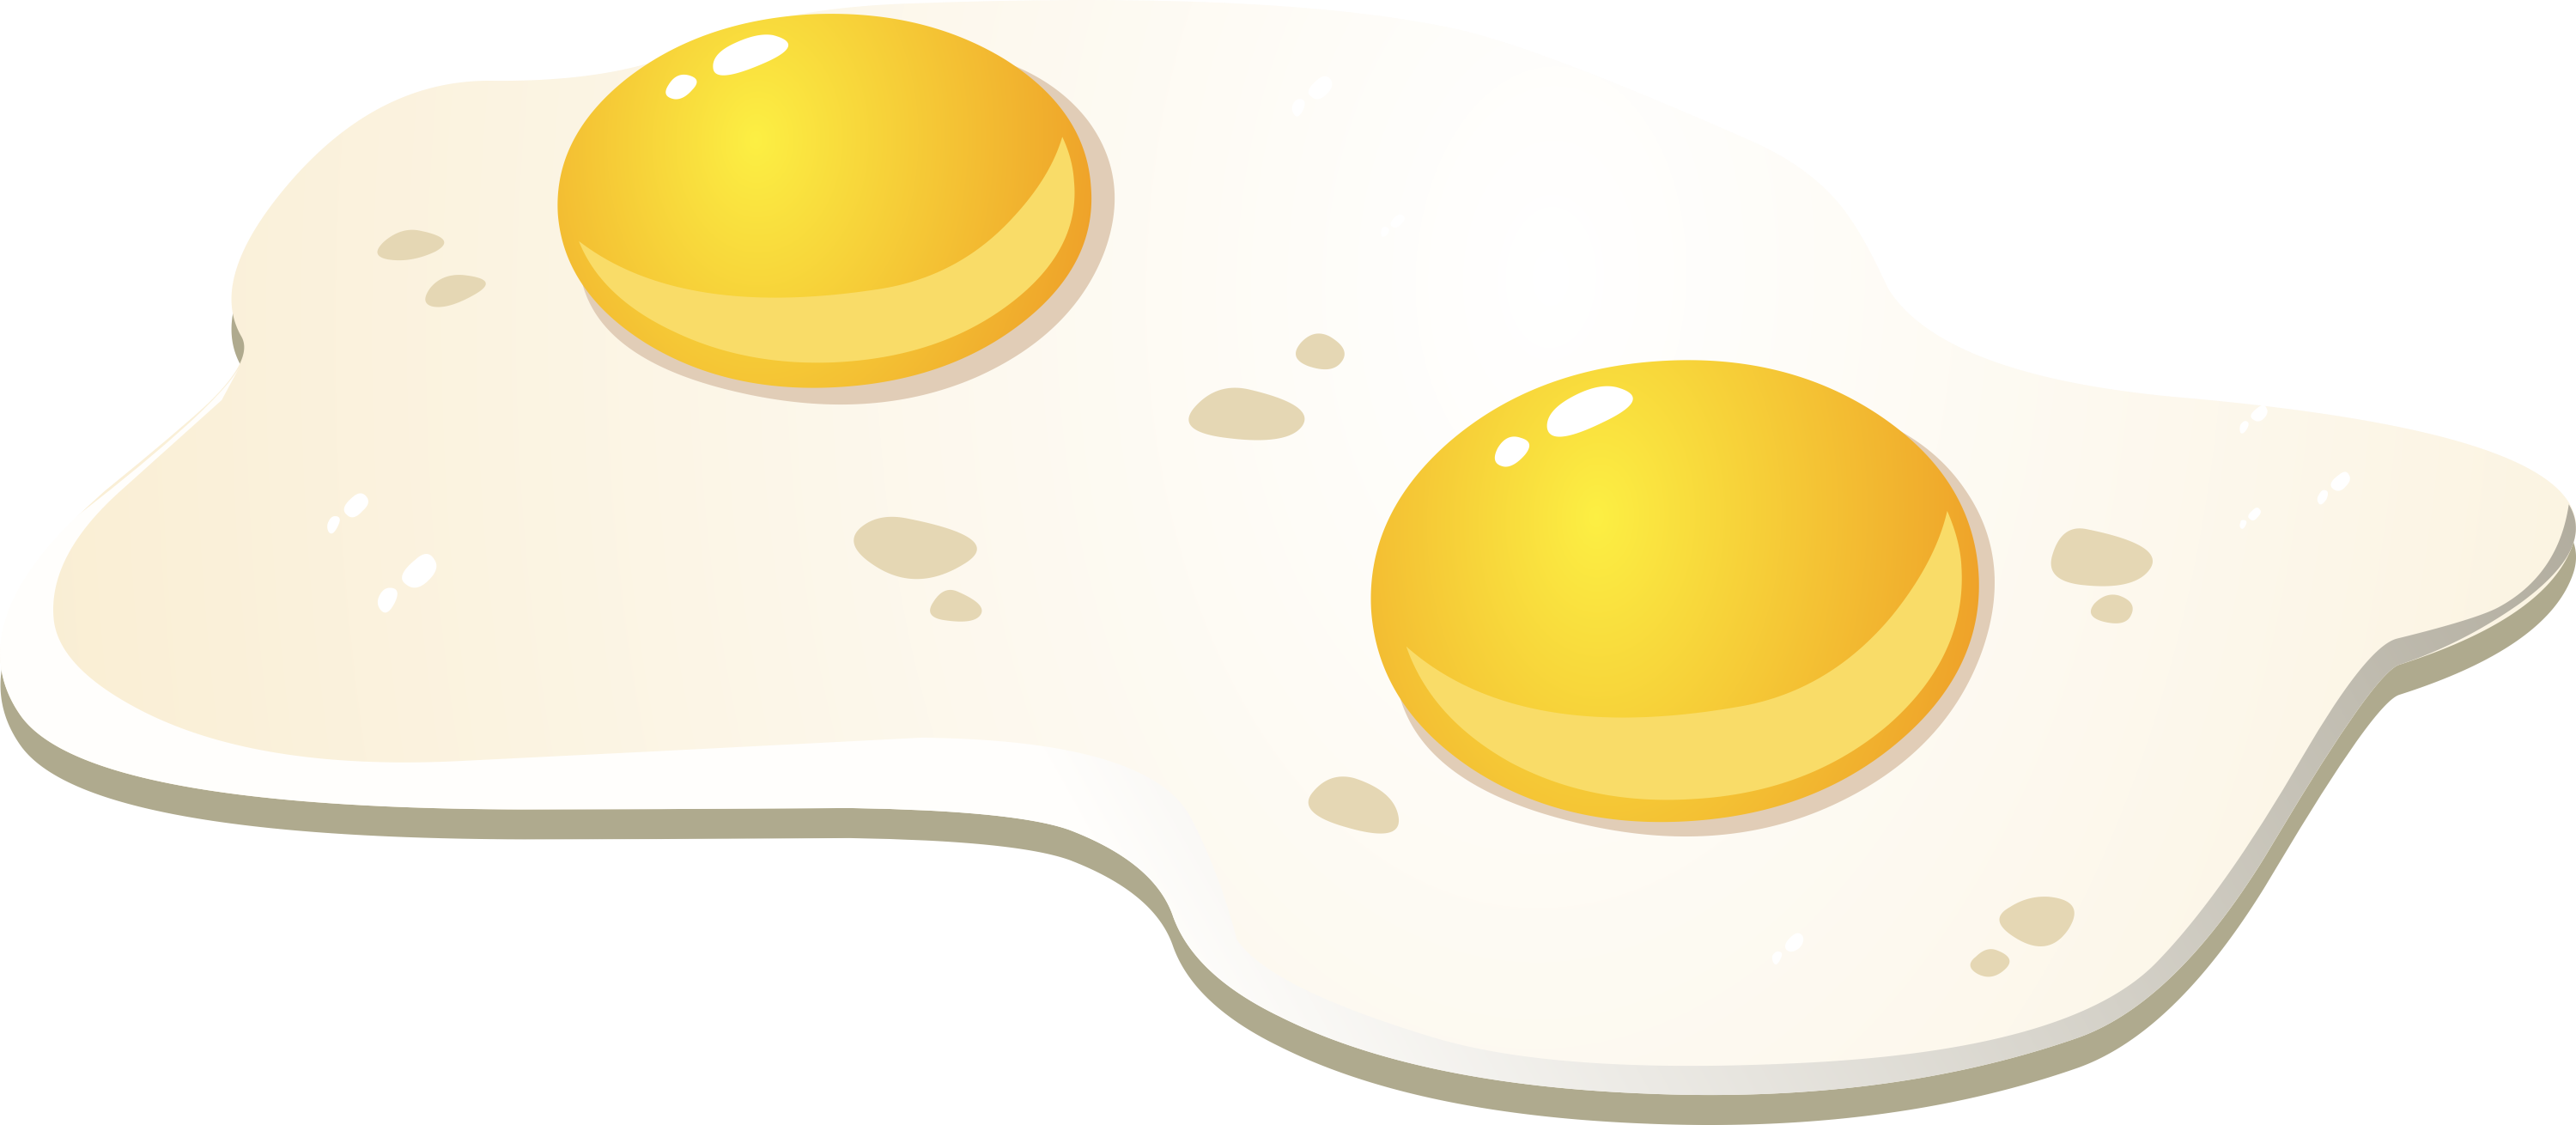 Egg Uncooked Clip Art. Download Full Size